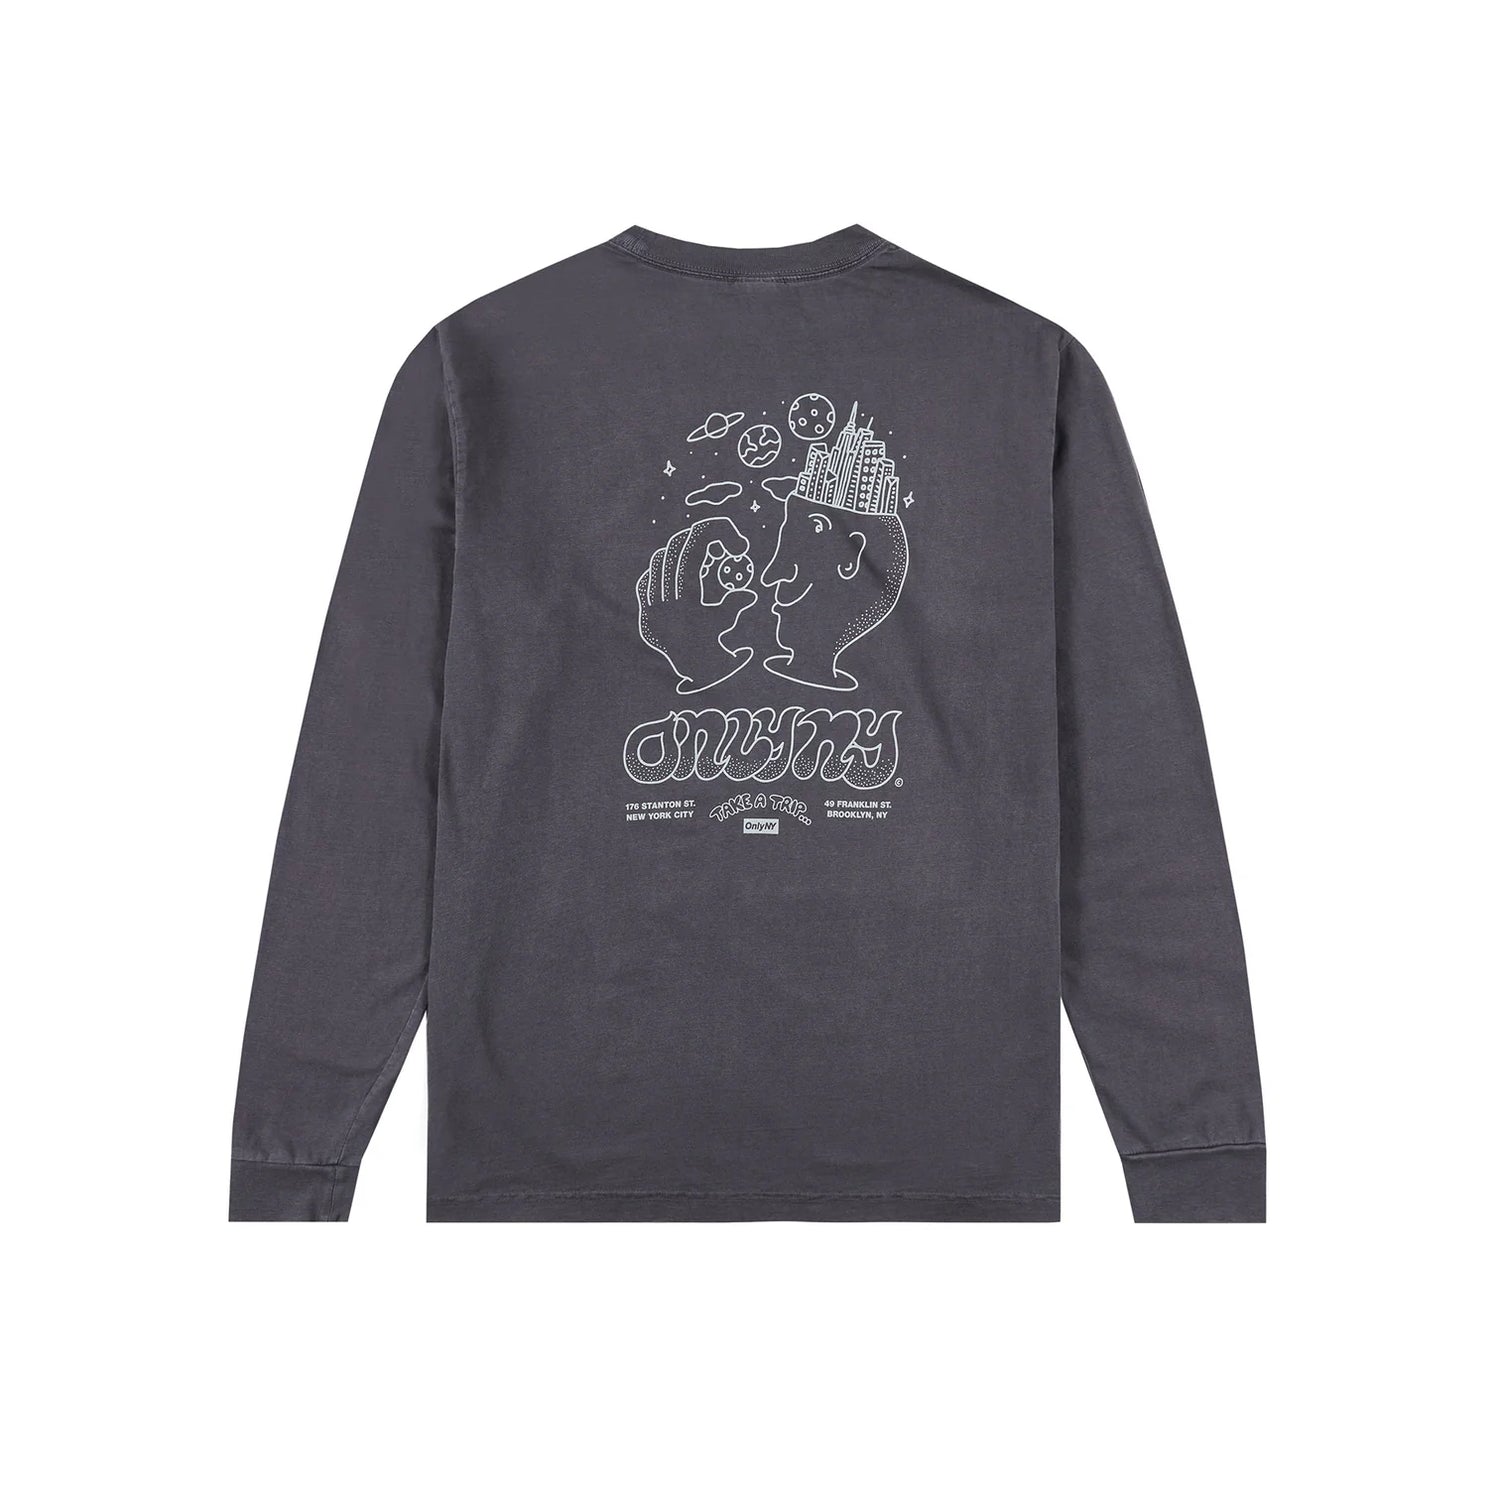 Only NY Astral Trip Long Sleeve T-Shirt - Vintage Black